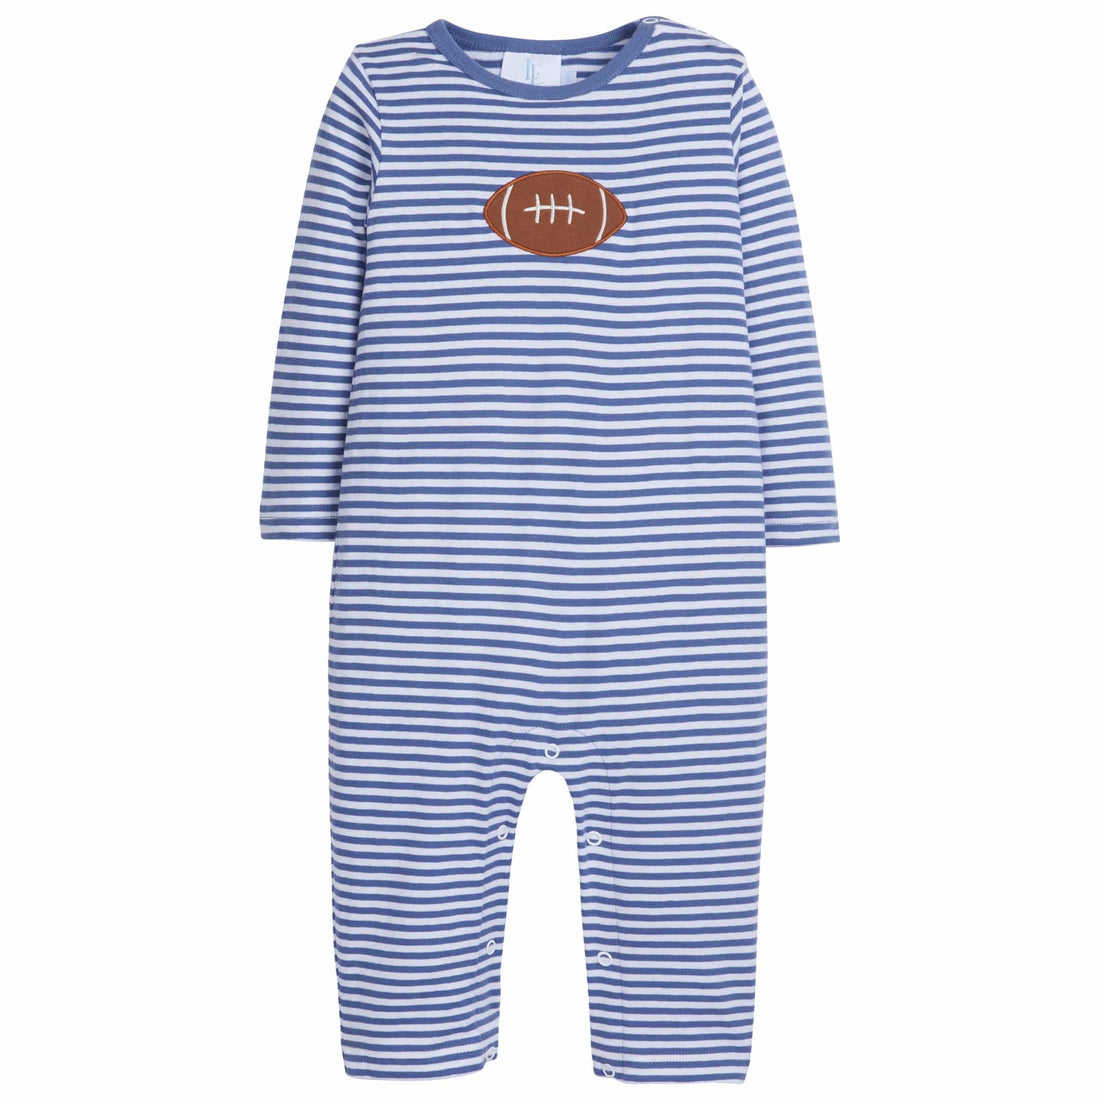 classic childrens clothing boys dark blue striped romper with applique football